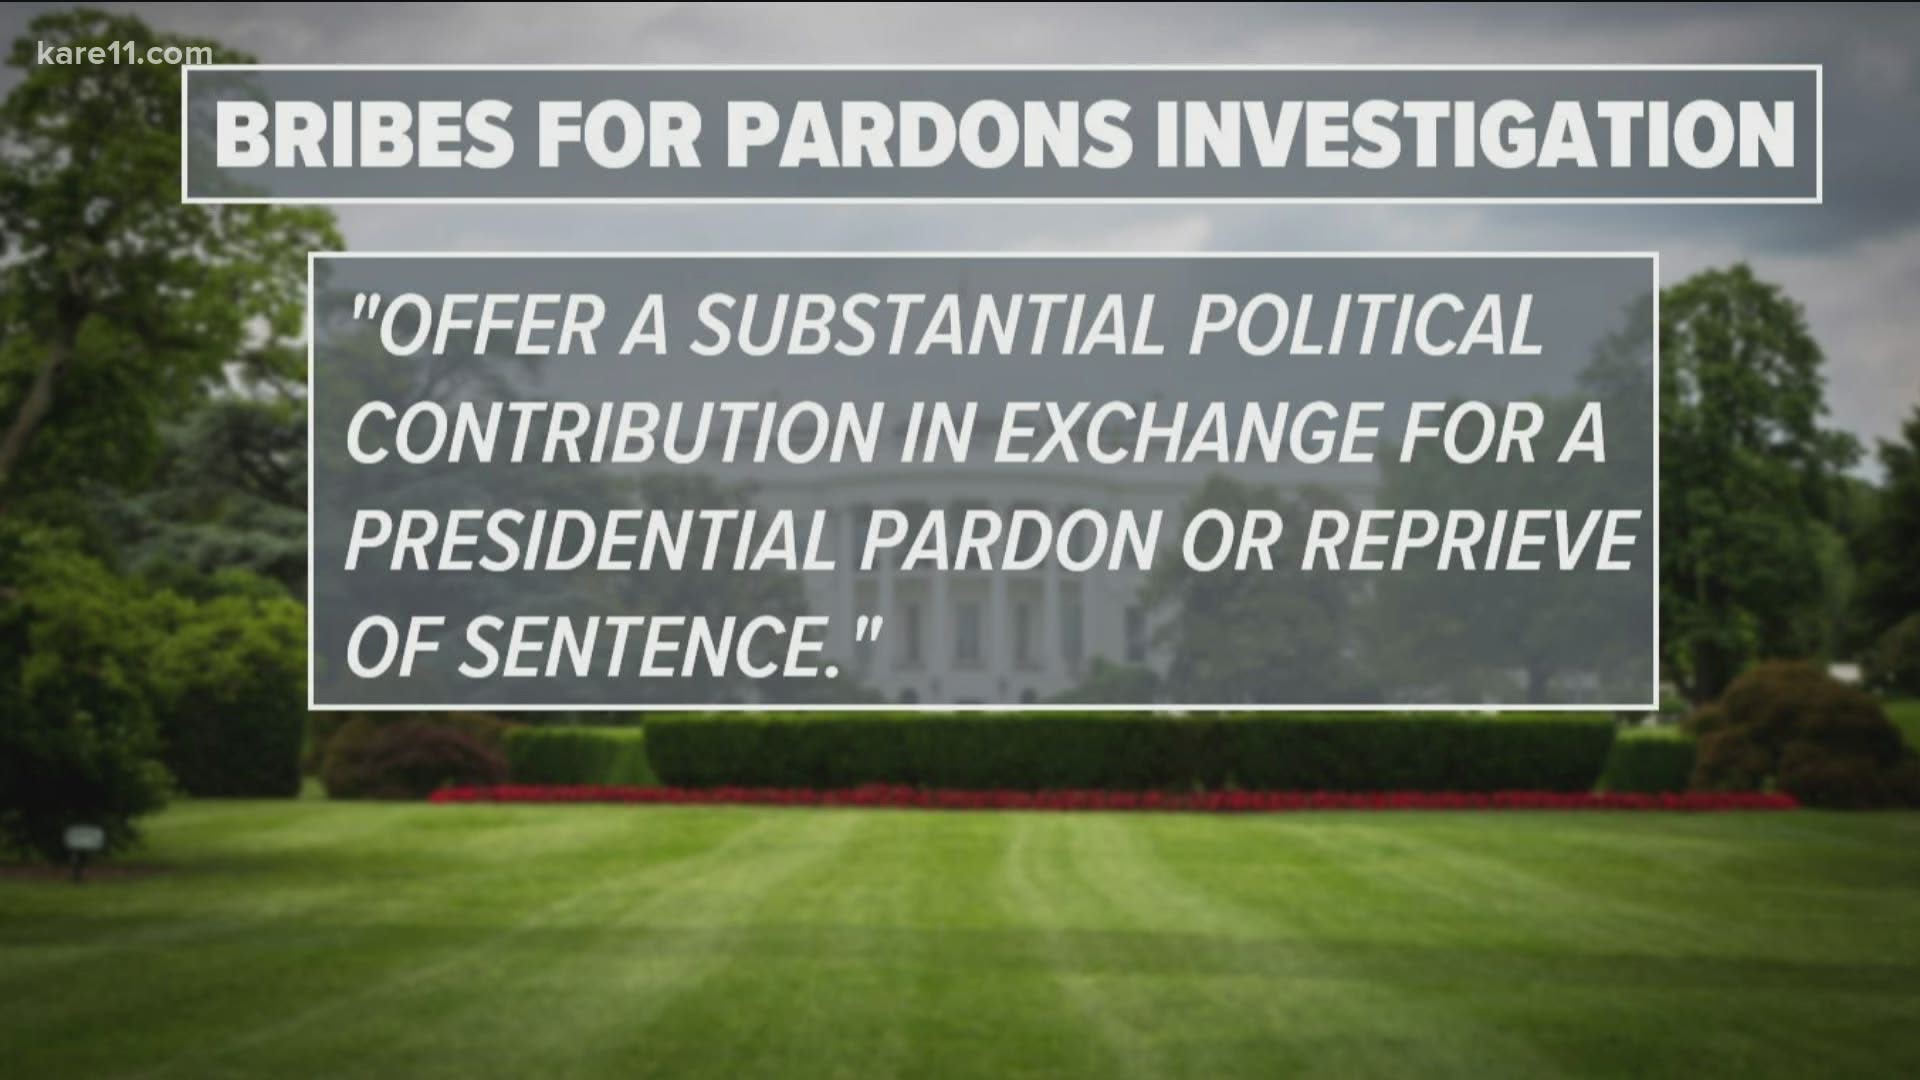 Unsealed court documents say the Justice Department has launched an investigation into a potential bribery scheme involving a presidential pardon.